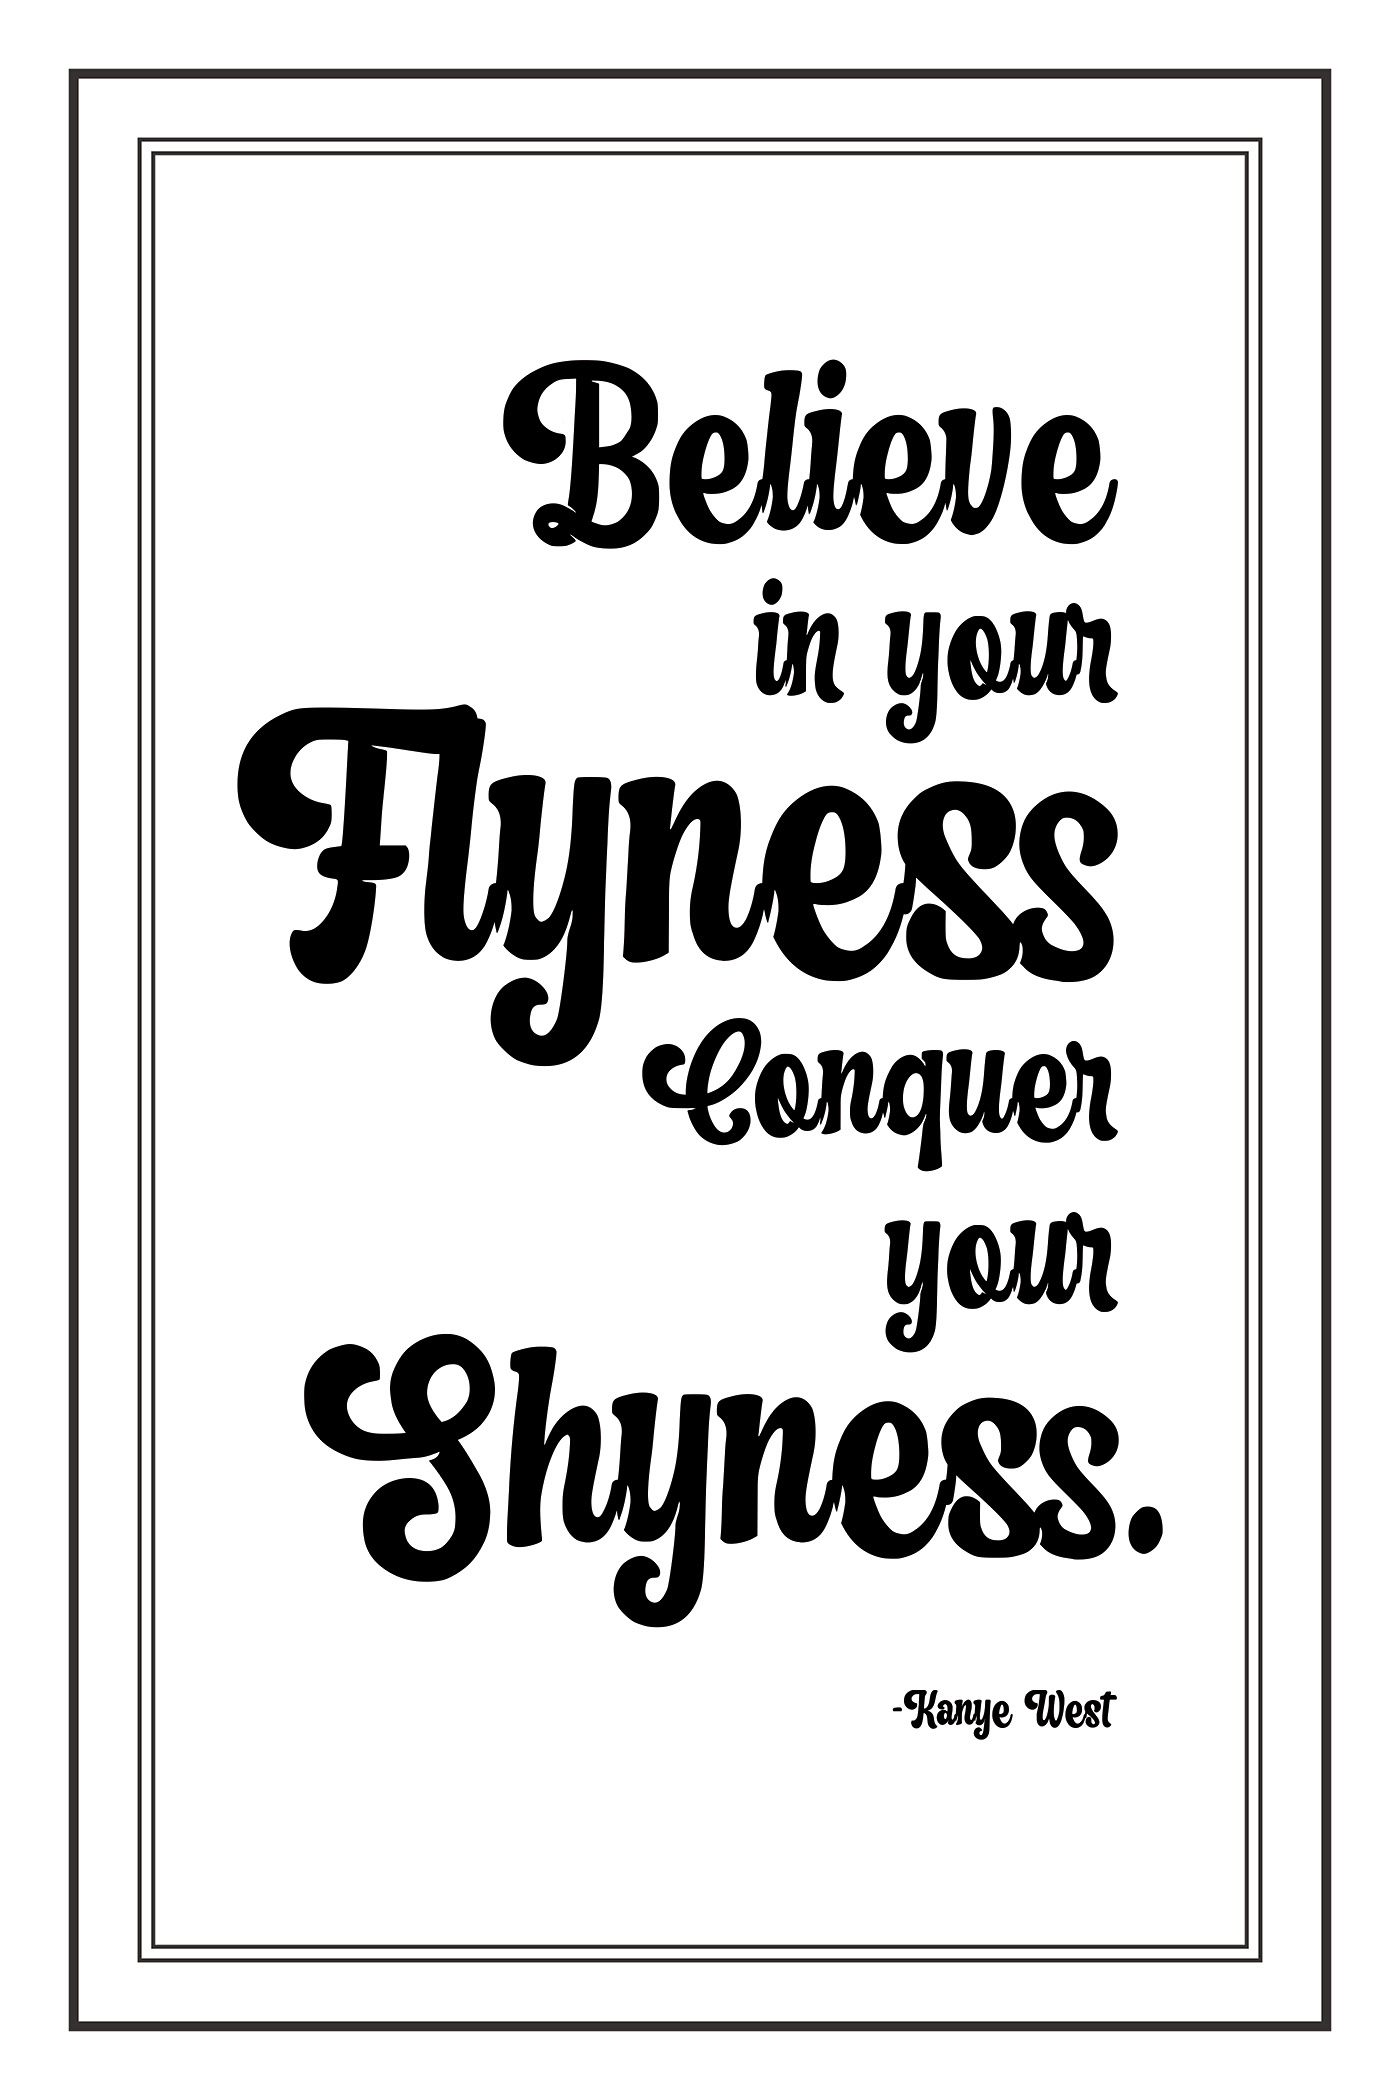 Believe in your flyness